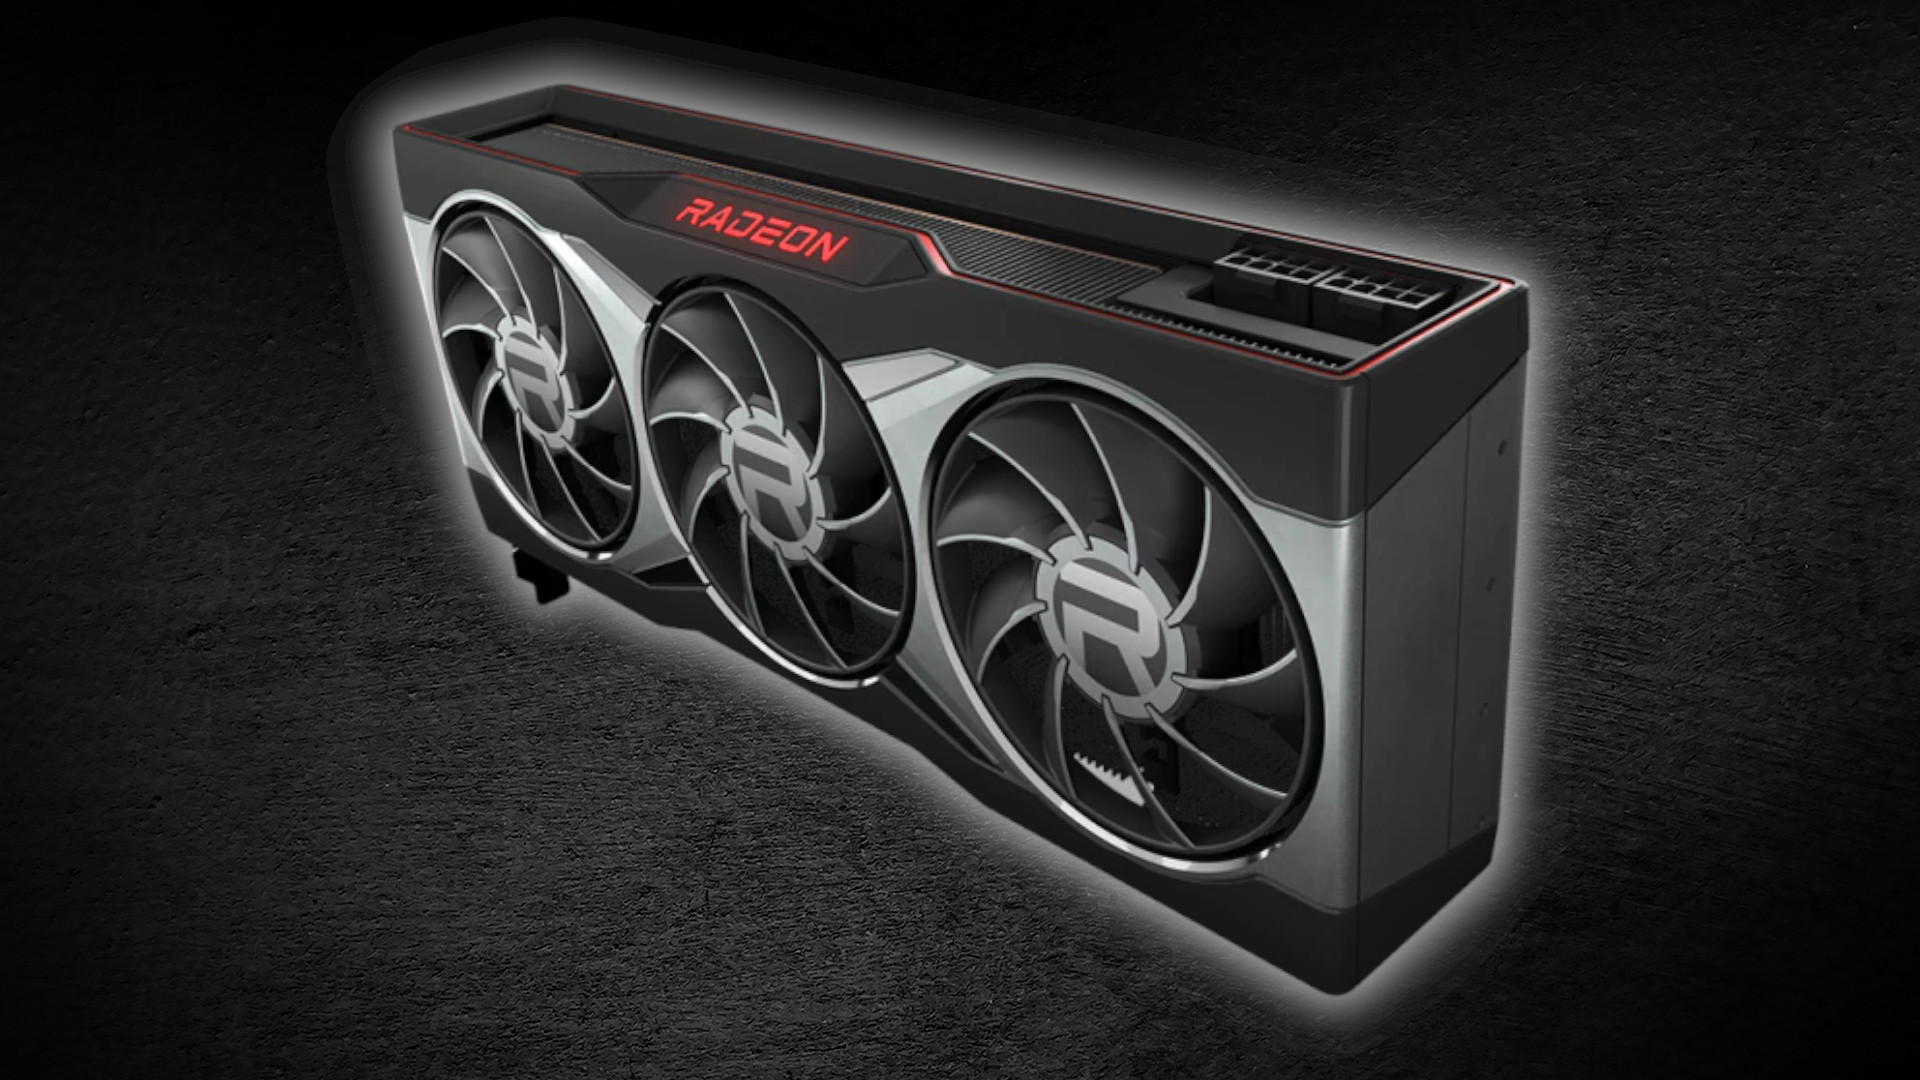 AMD Radeon RX 6900 XT is the cheapest the GPU has ever been